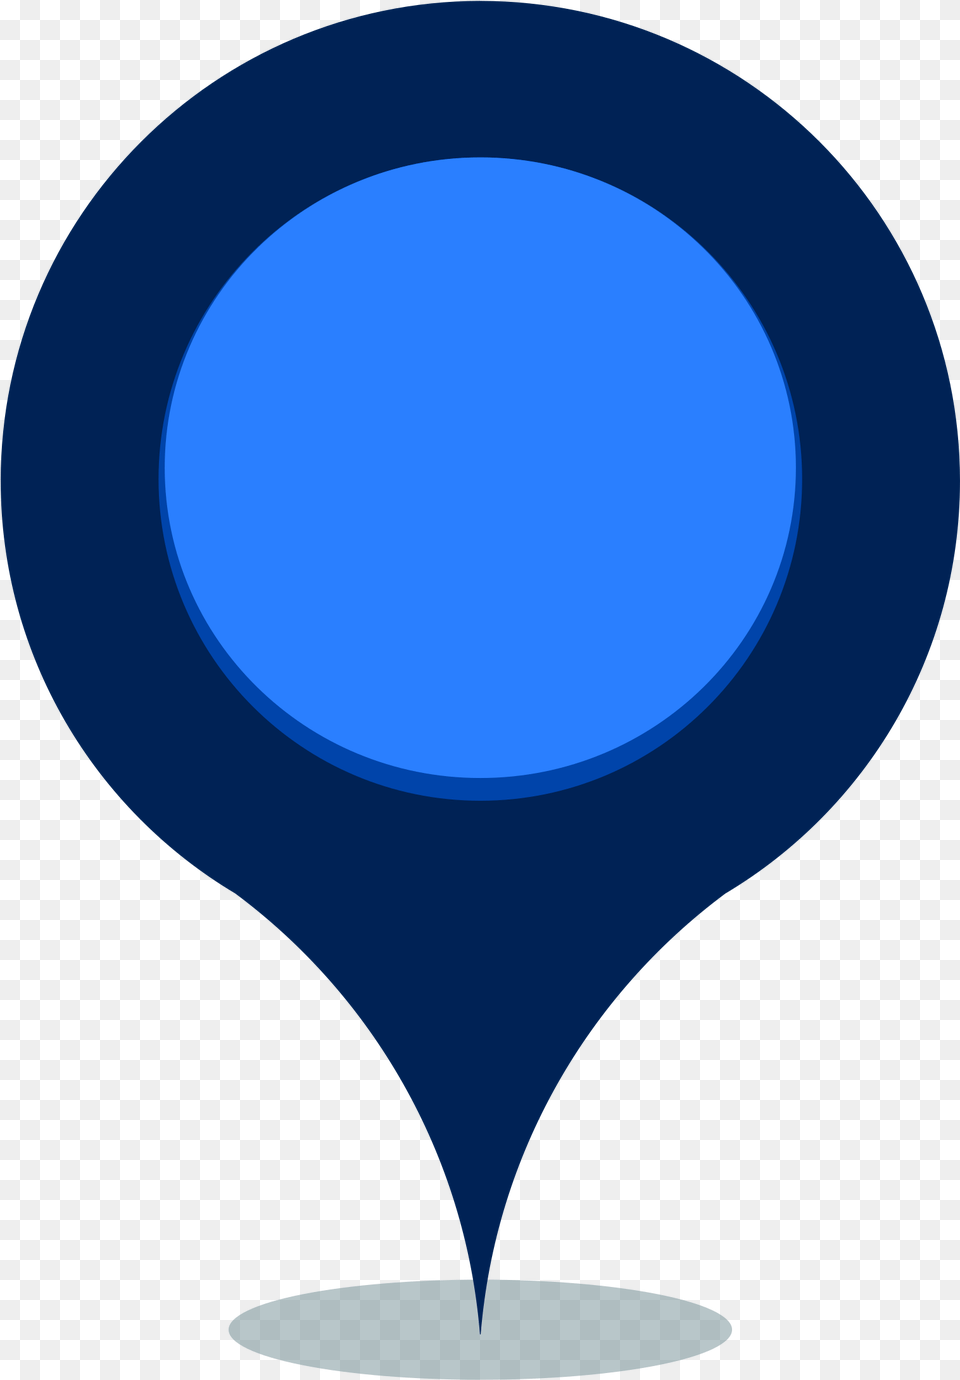 Map Google Pin Maps Maker Hq Image Blue Map Marker, Balloon, Lighting, Astronomy, Moon Png